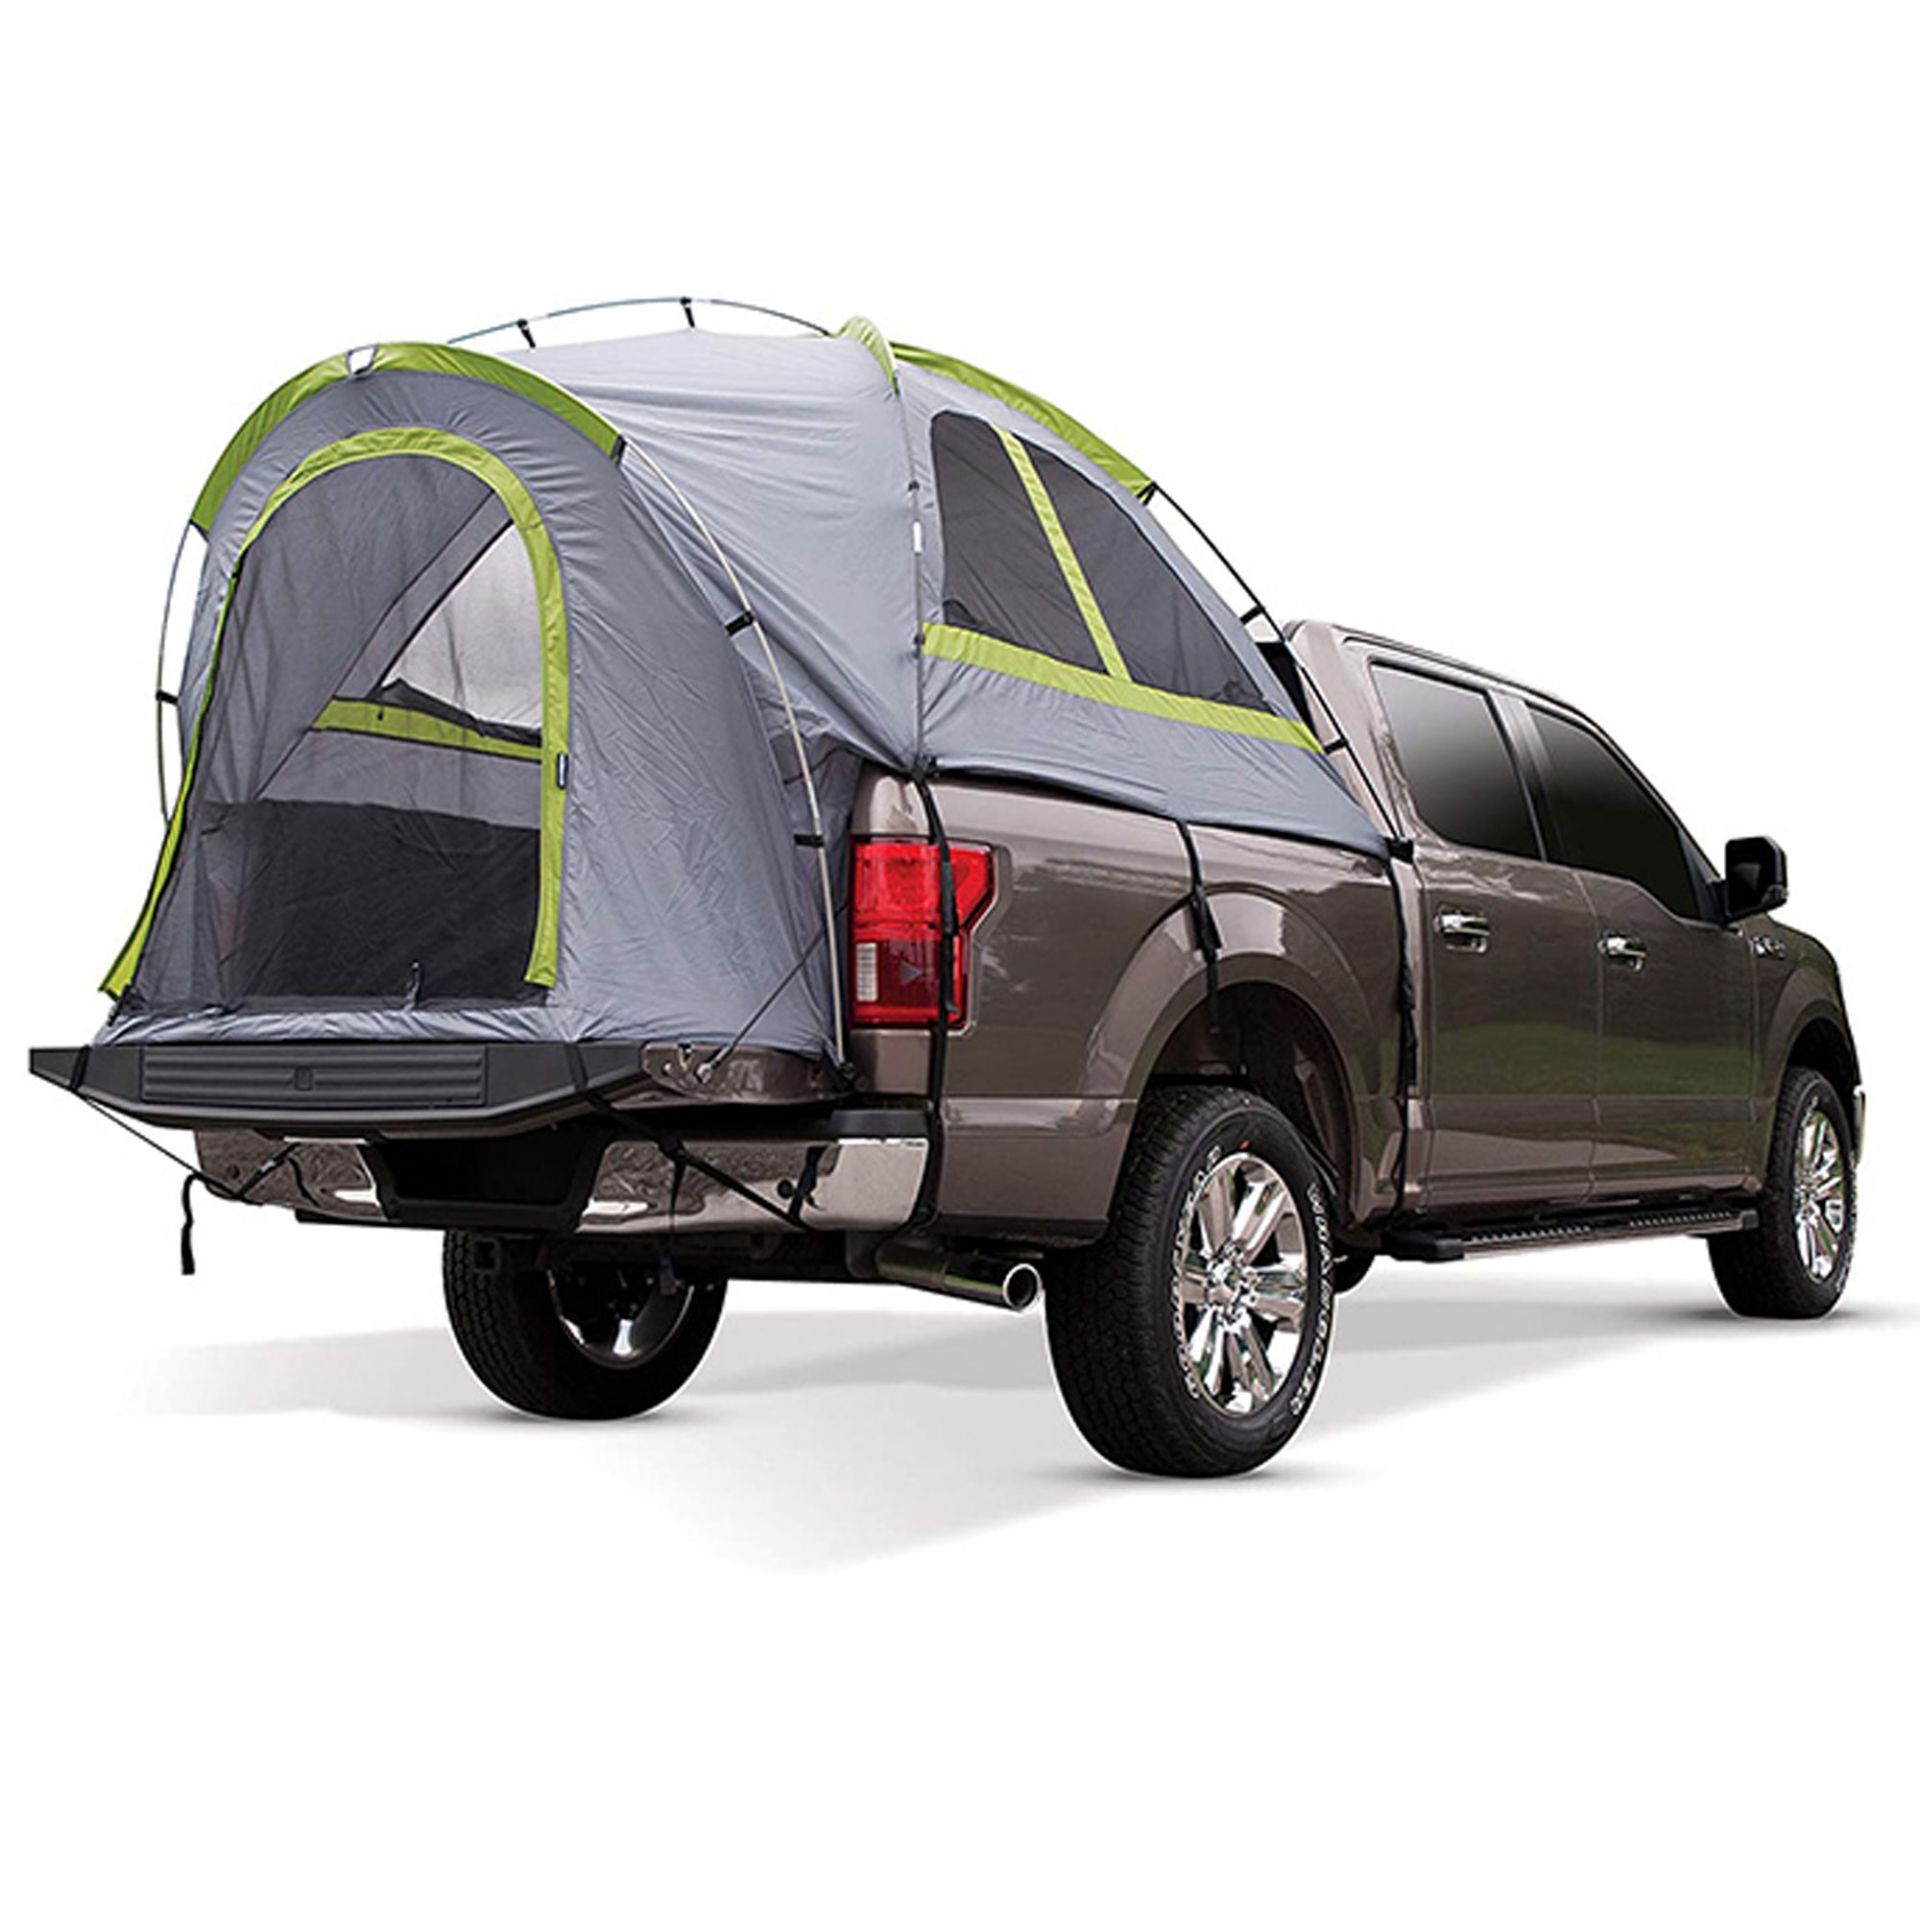 UNITS - RBSM SMALL TRUCK CAMPING TENT W/ RAINFLY (NEW) (MSRP $280)